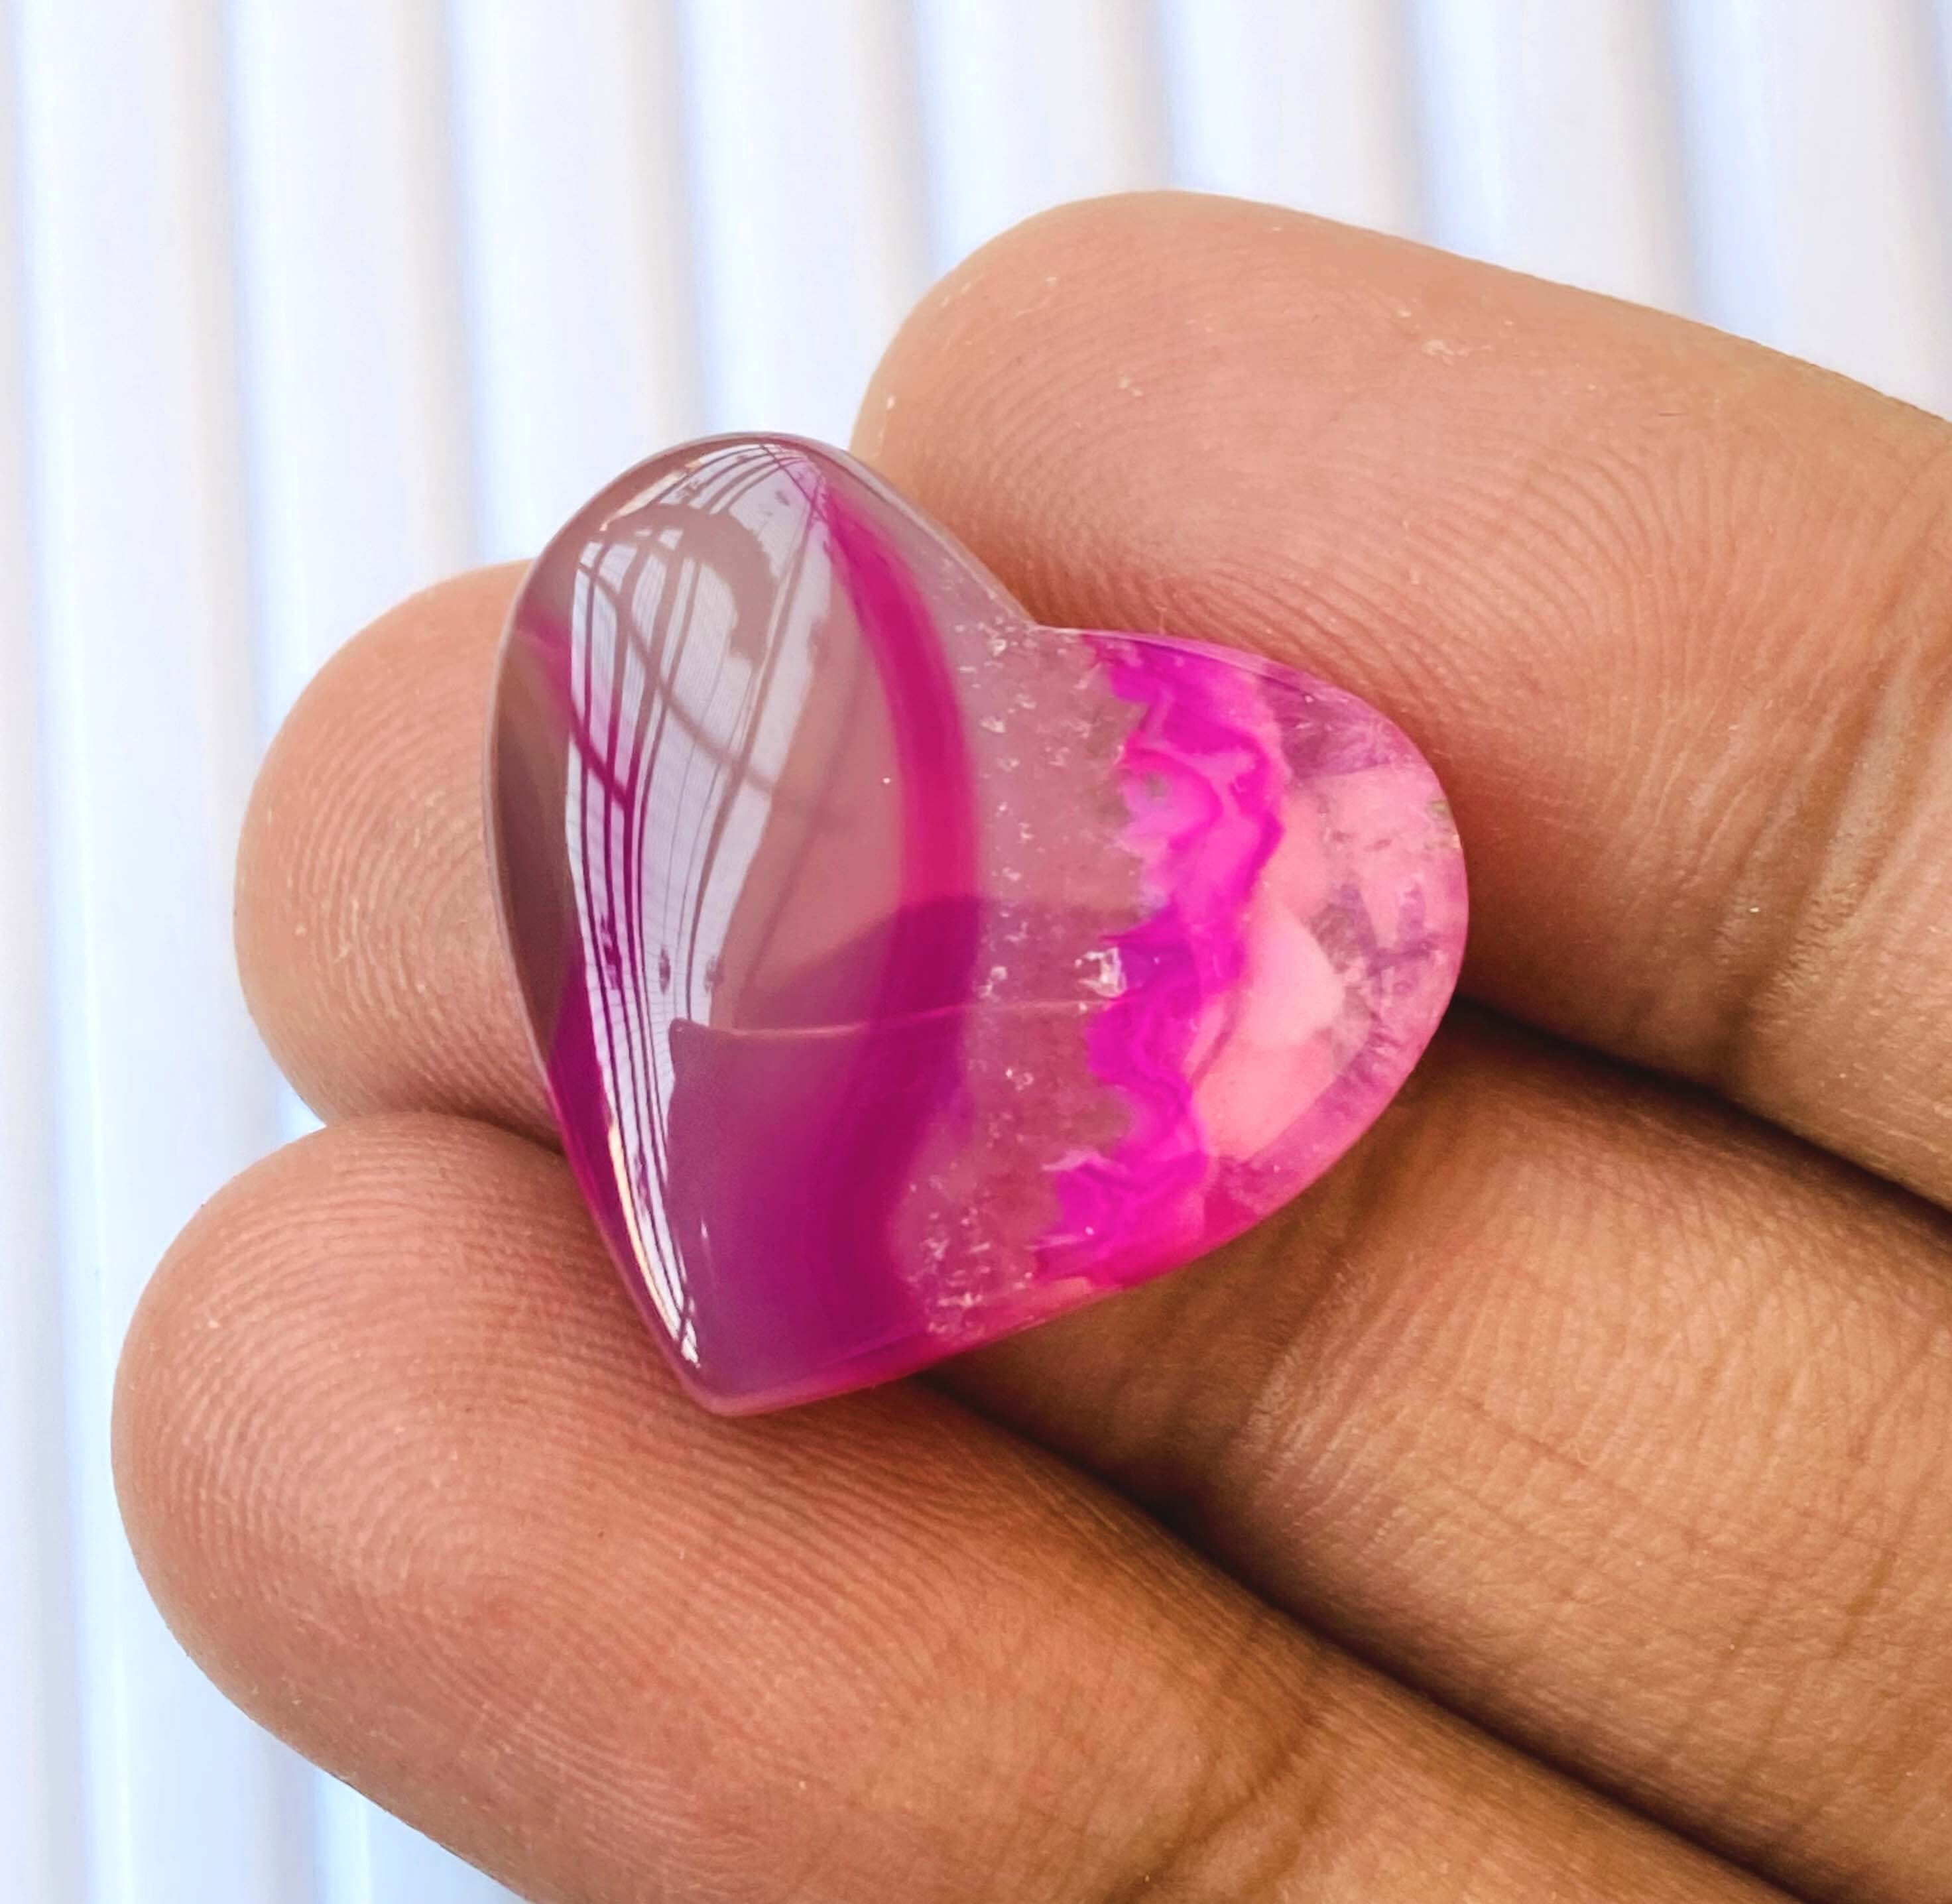 Pink Heart Aqeeq 100% Natural gemstone High Quality Pendant Size Gemstone Size-30x32x8MM Cts-57.95 And Gorgeous!!! extra gift